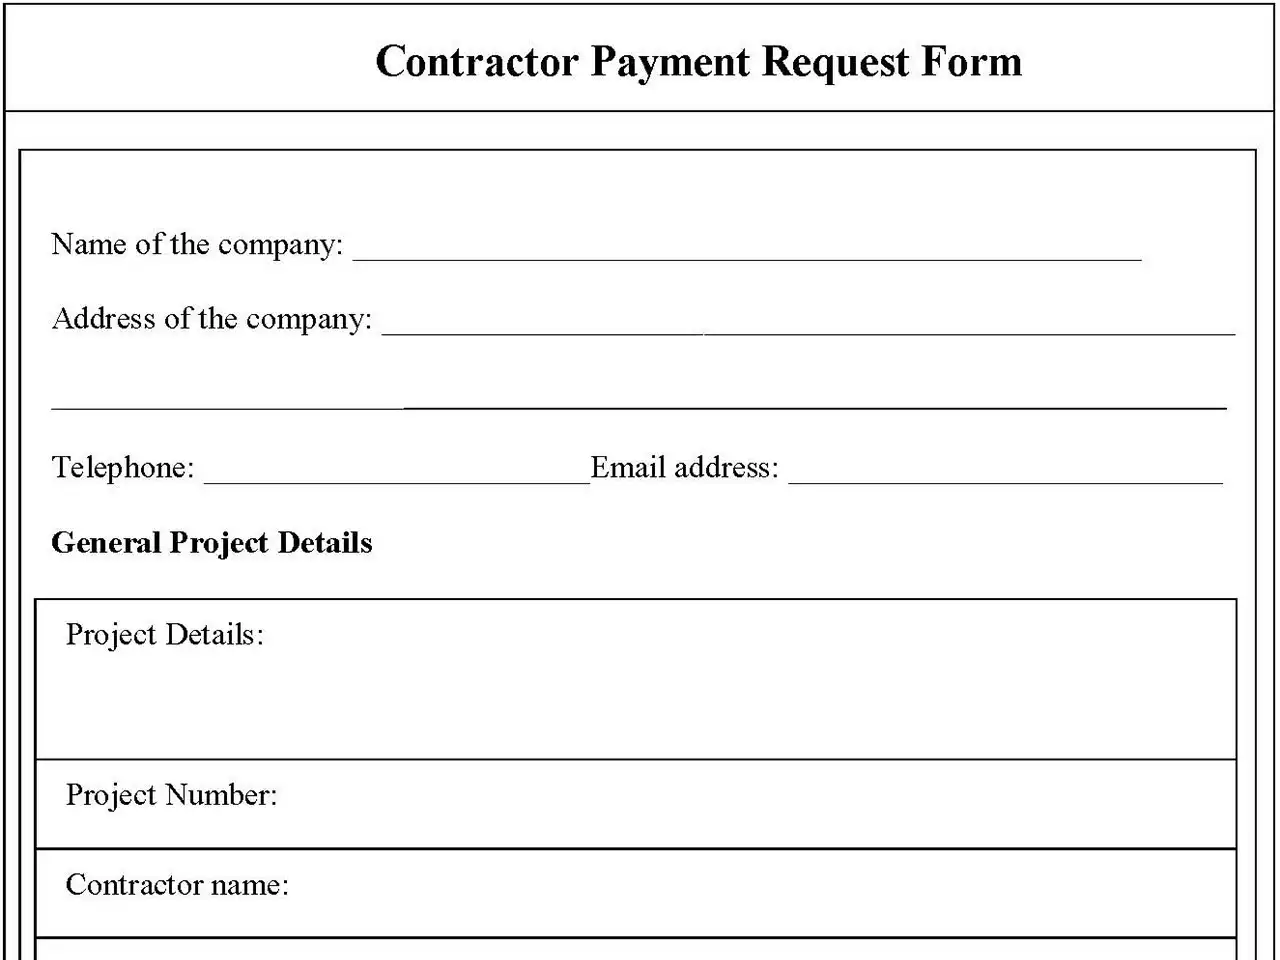 Contractor Payment Request Form